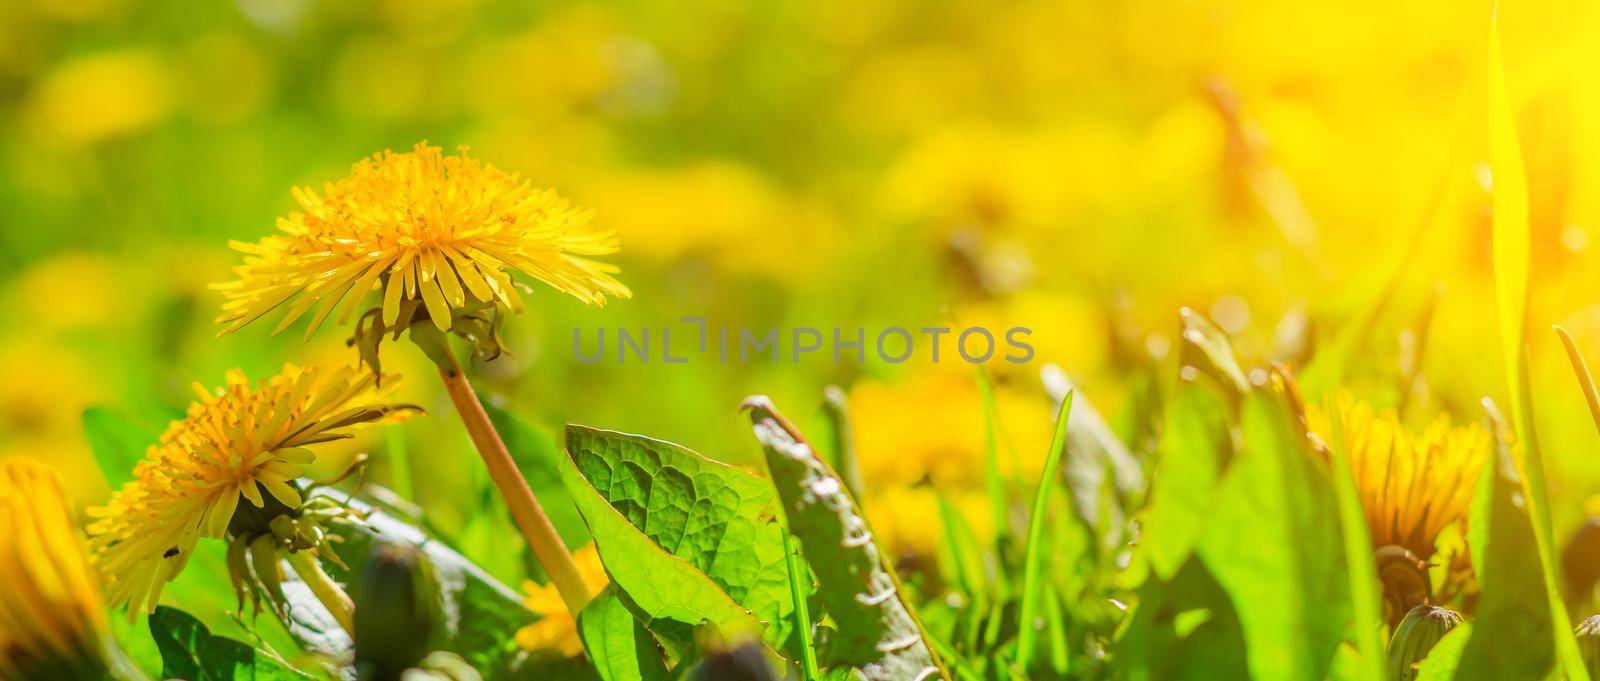 A field of dandelions. An article about summer flowers. Beautiful yellow flowers background with light. Bright summer sunny flowers. Dandelions